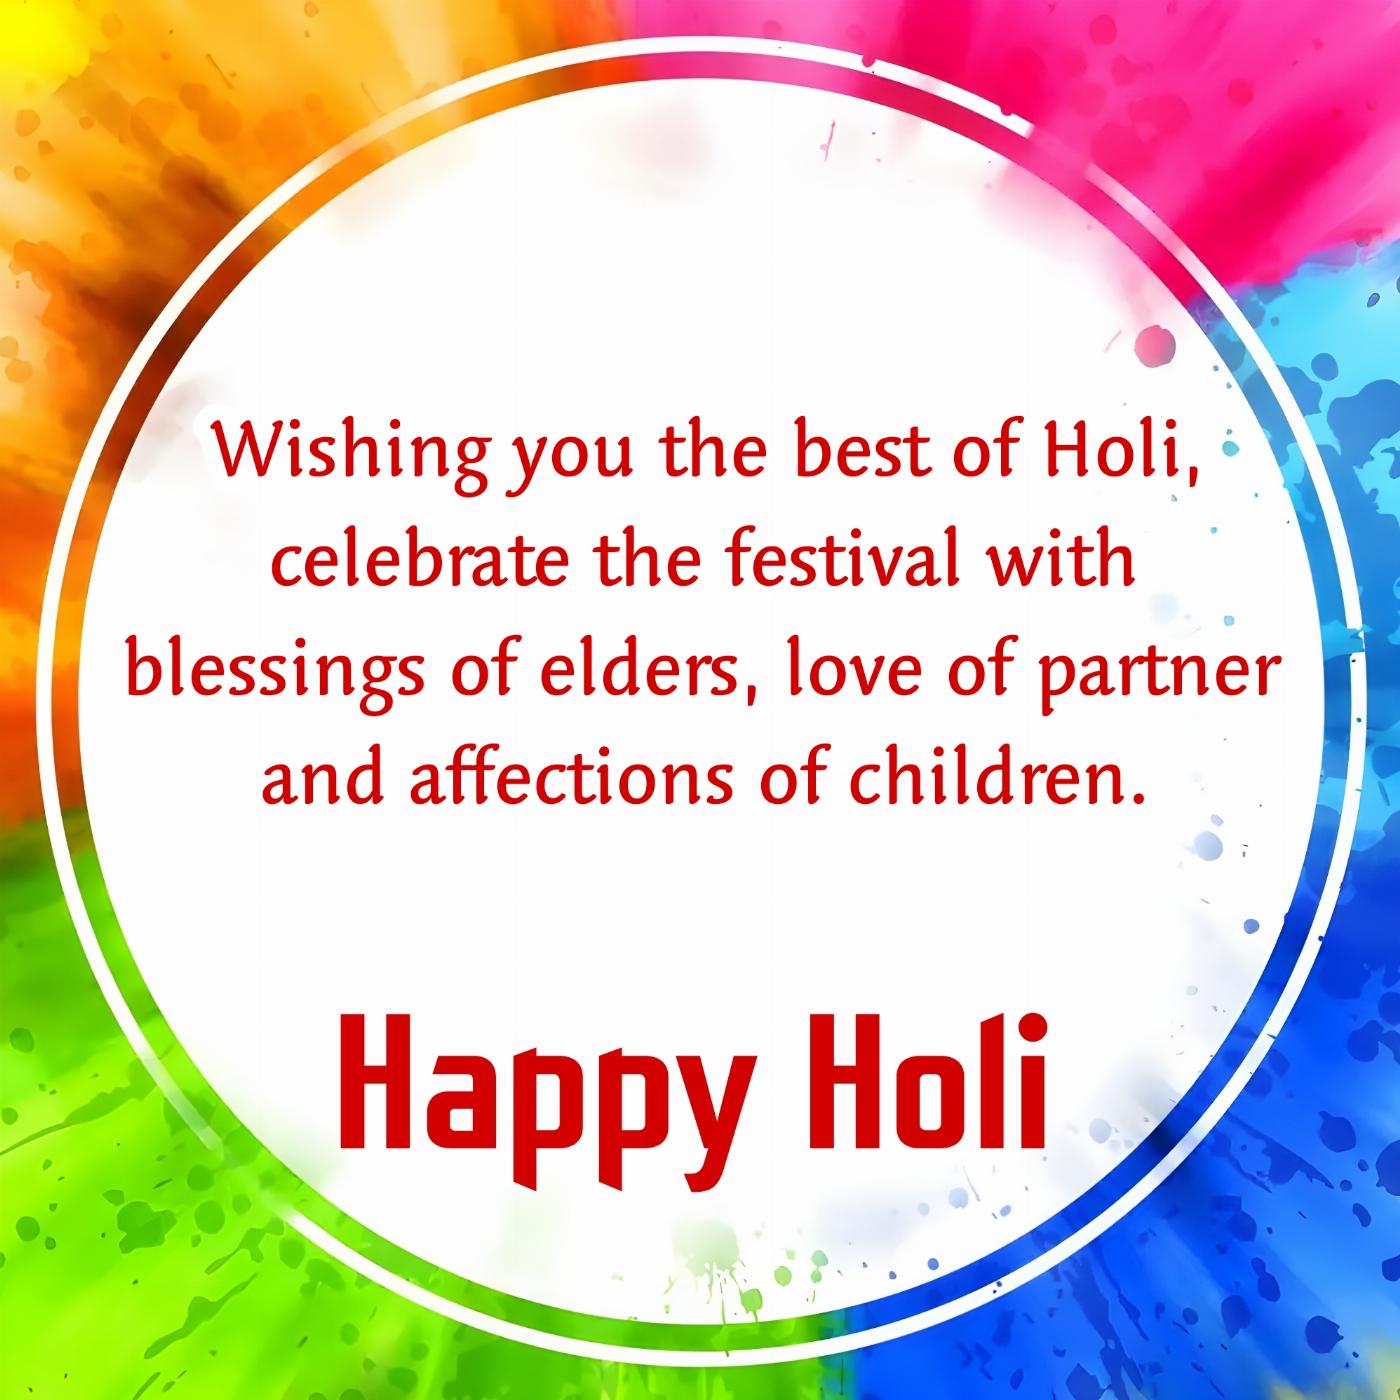 Wishing you the best of Holi celebrate the festival with blessings of elders